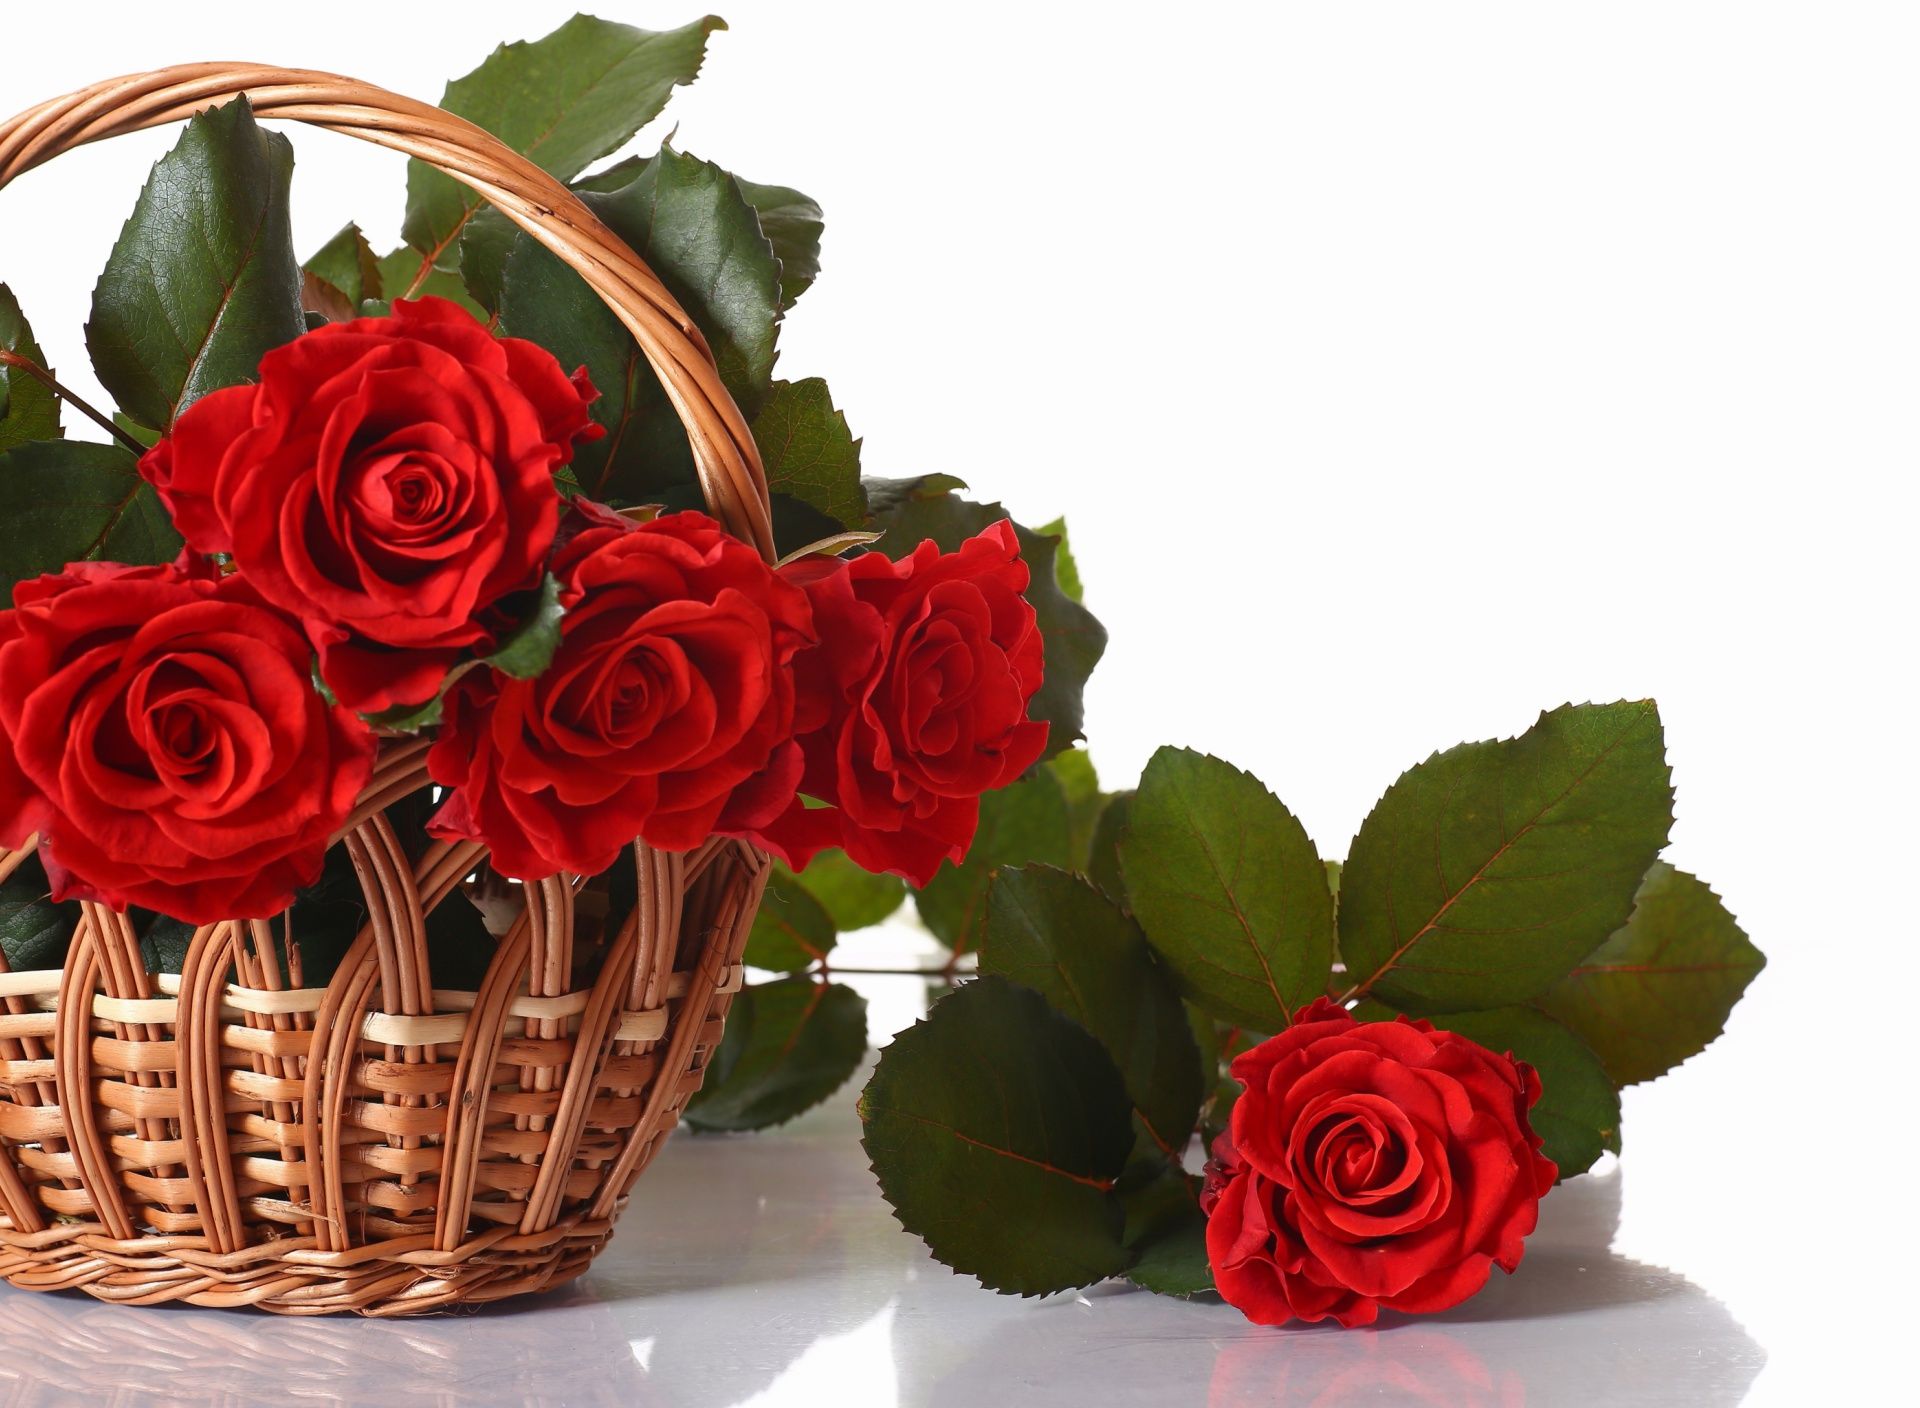 Basket with Roses wallpaper 1920x1408